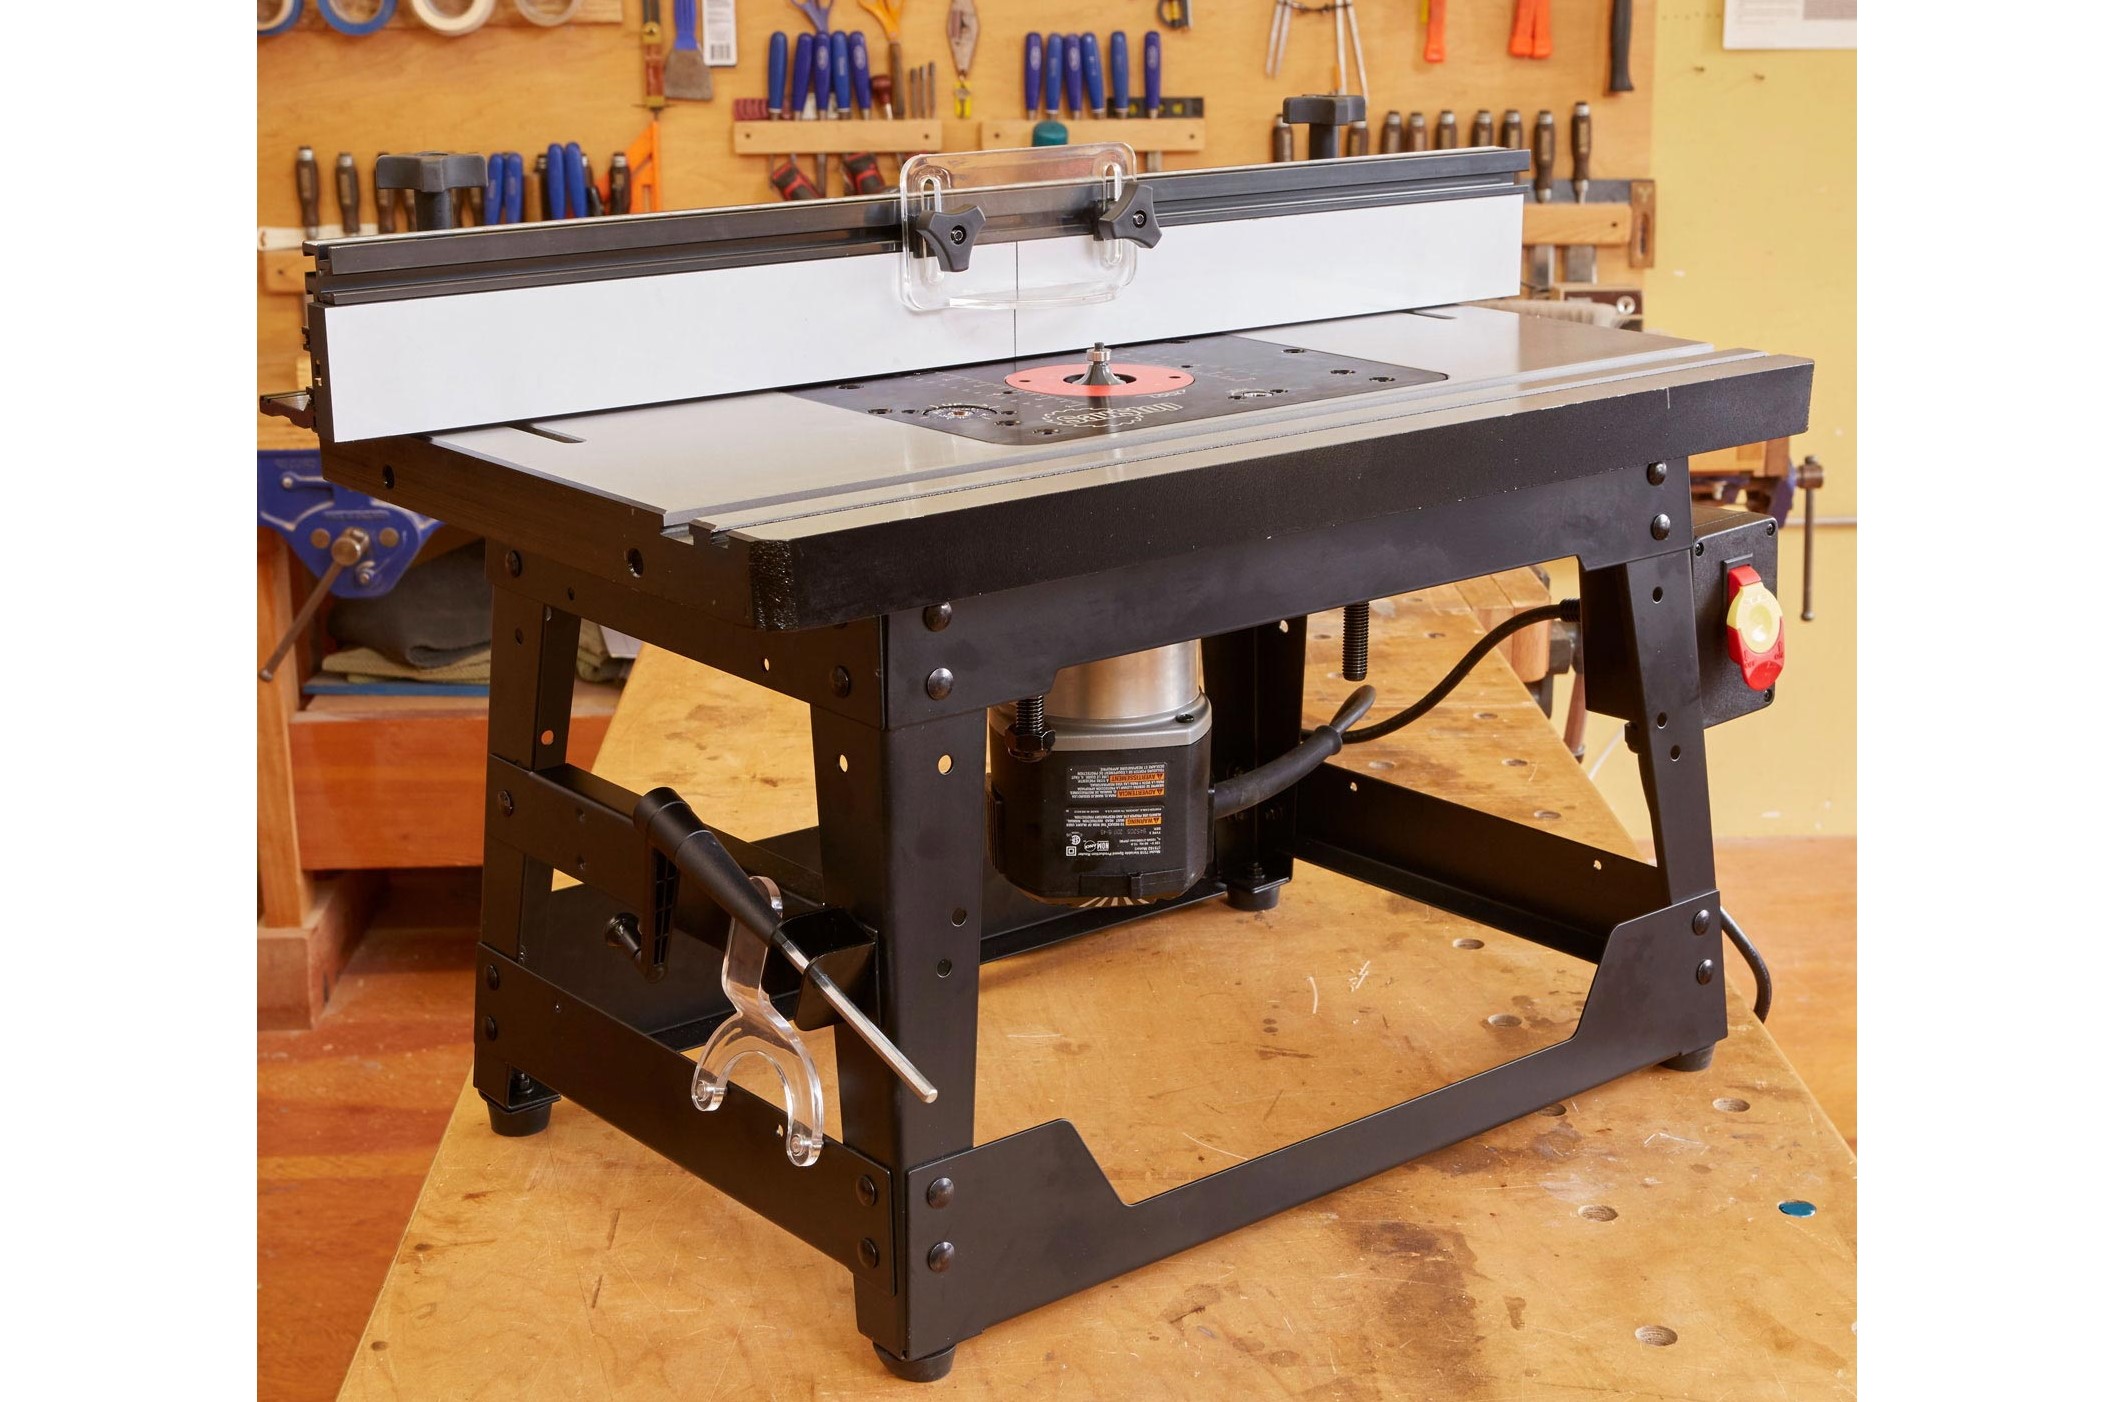 Best router tables: Benchtop, portable, and DIY designs